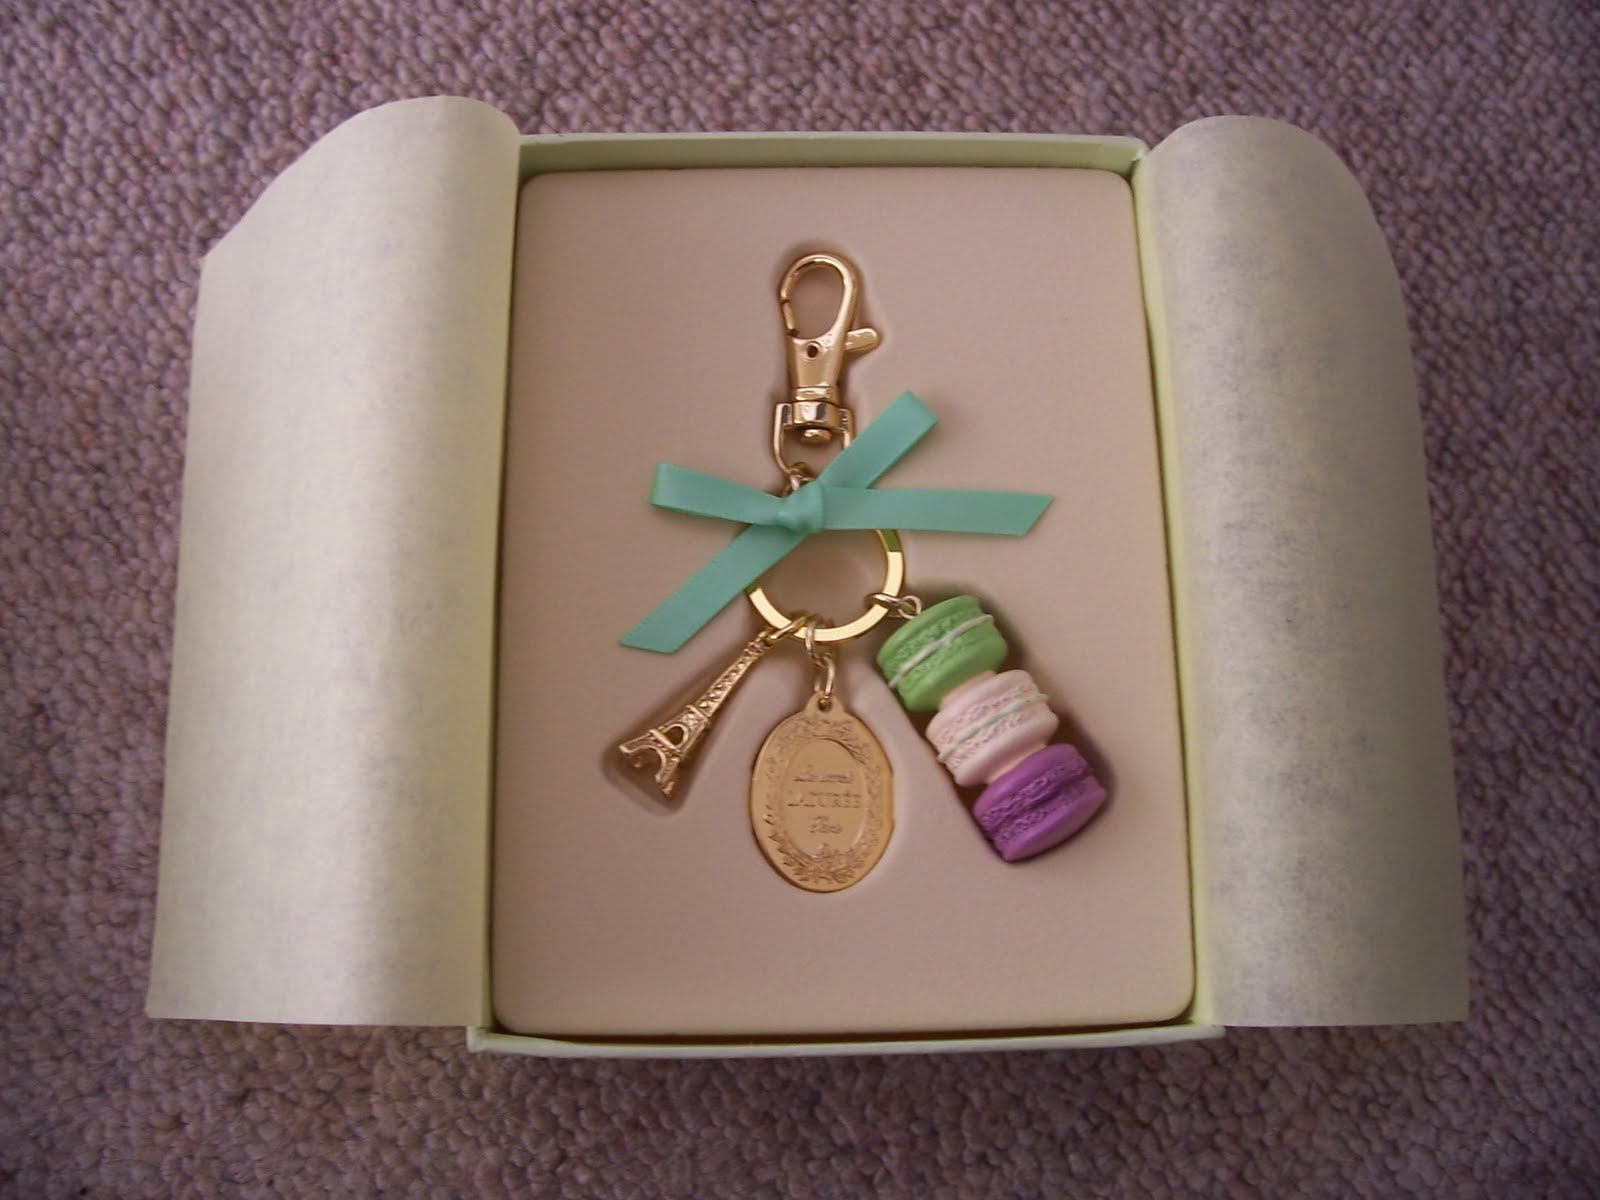 Ladurée bag charm and other gifts - The Graphic Foodie